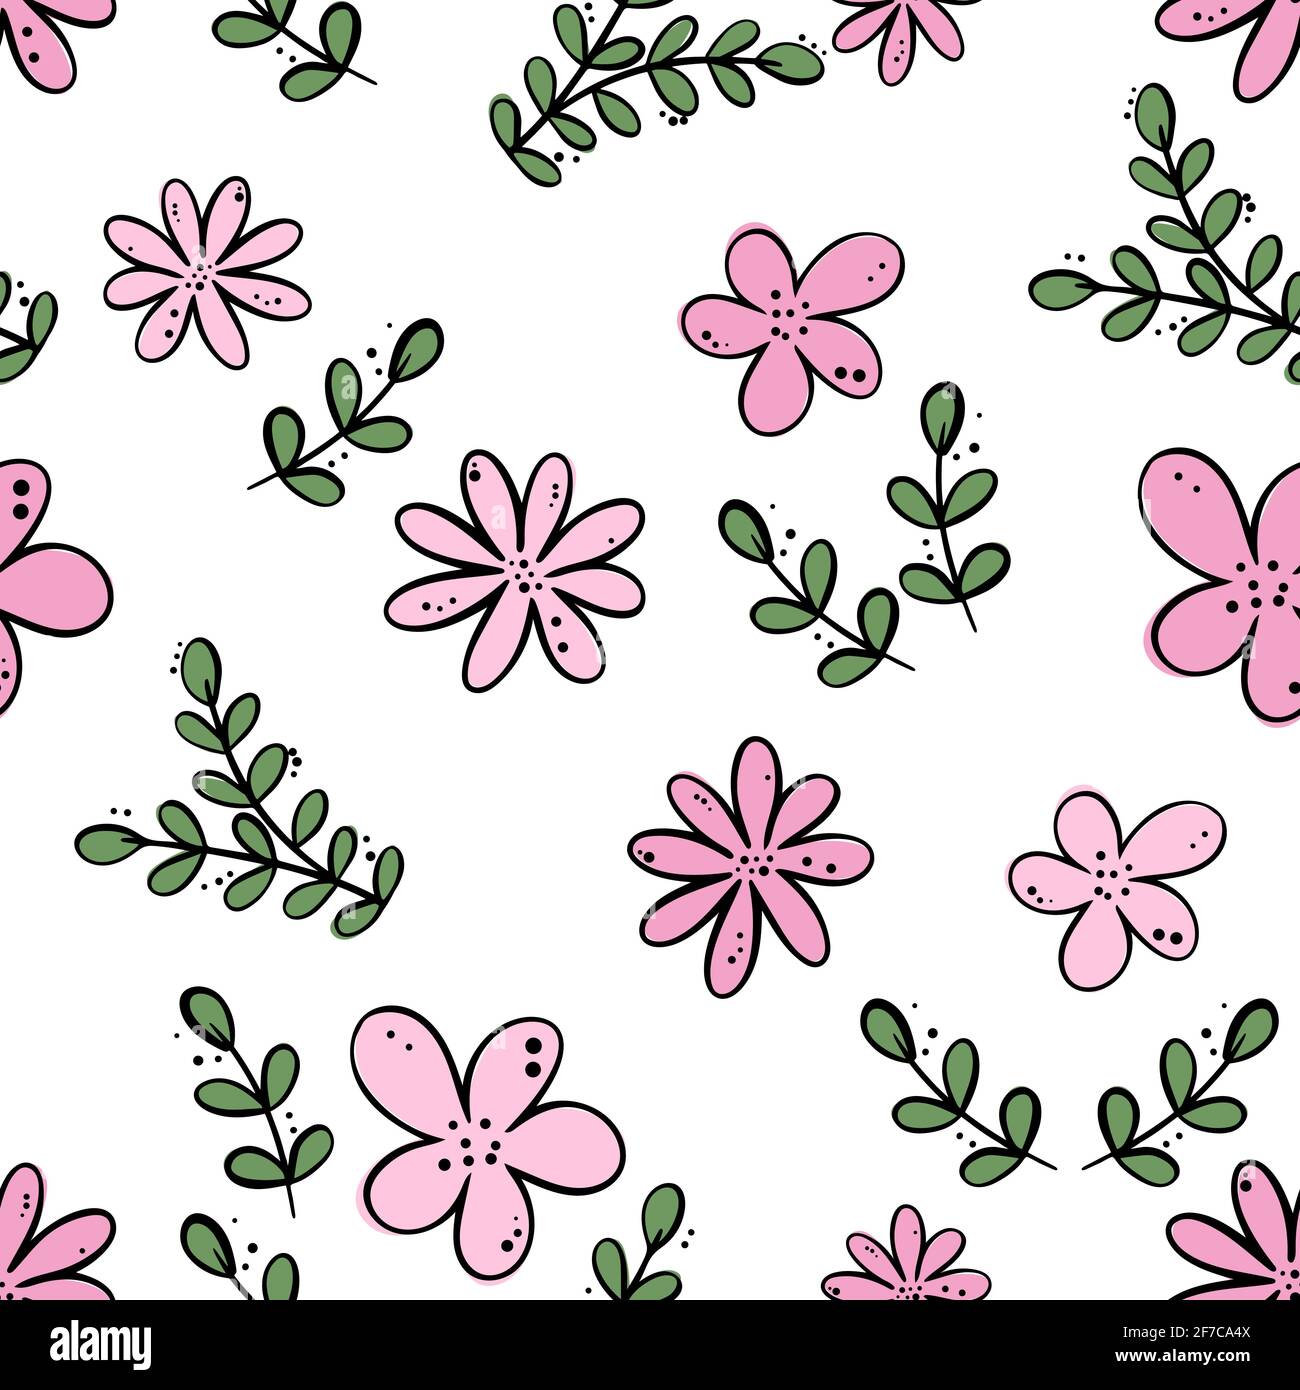 Seamless continuous pattern with flowers and leaves. Drawn pink flowers ...